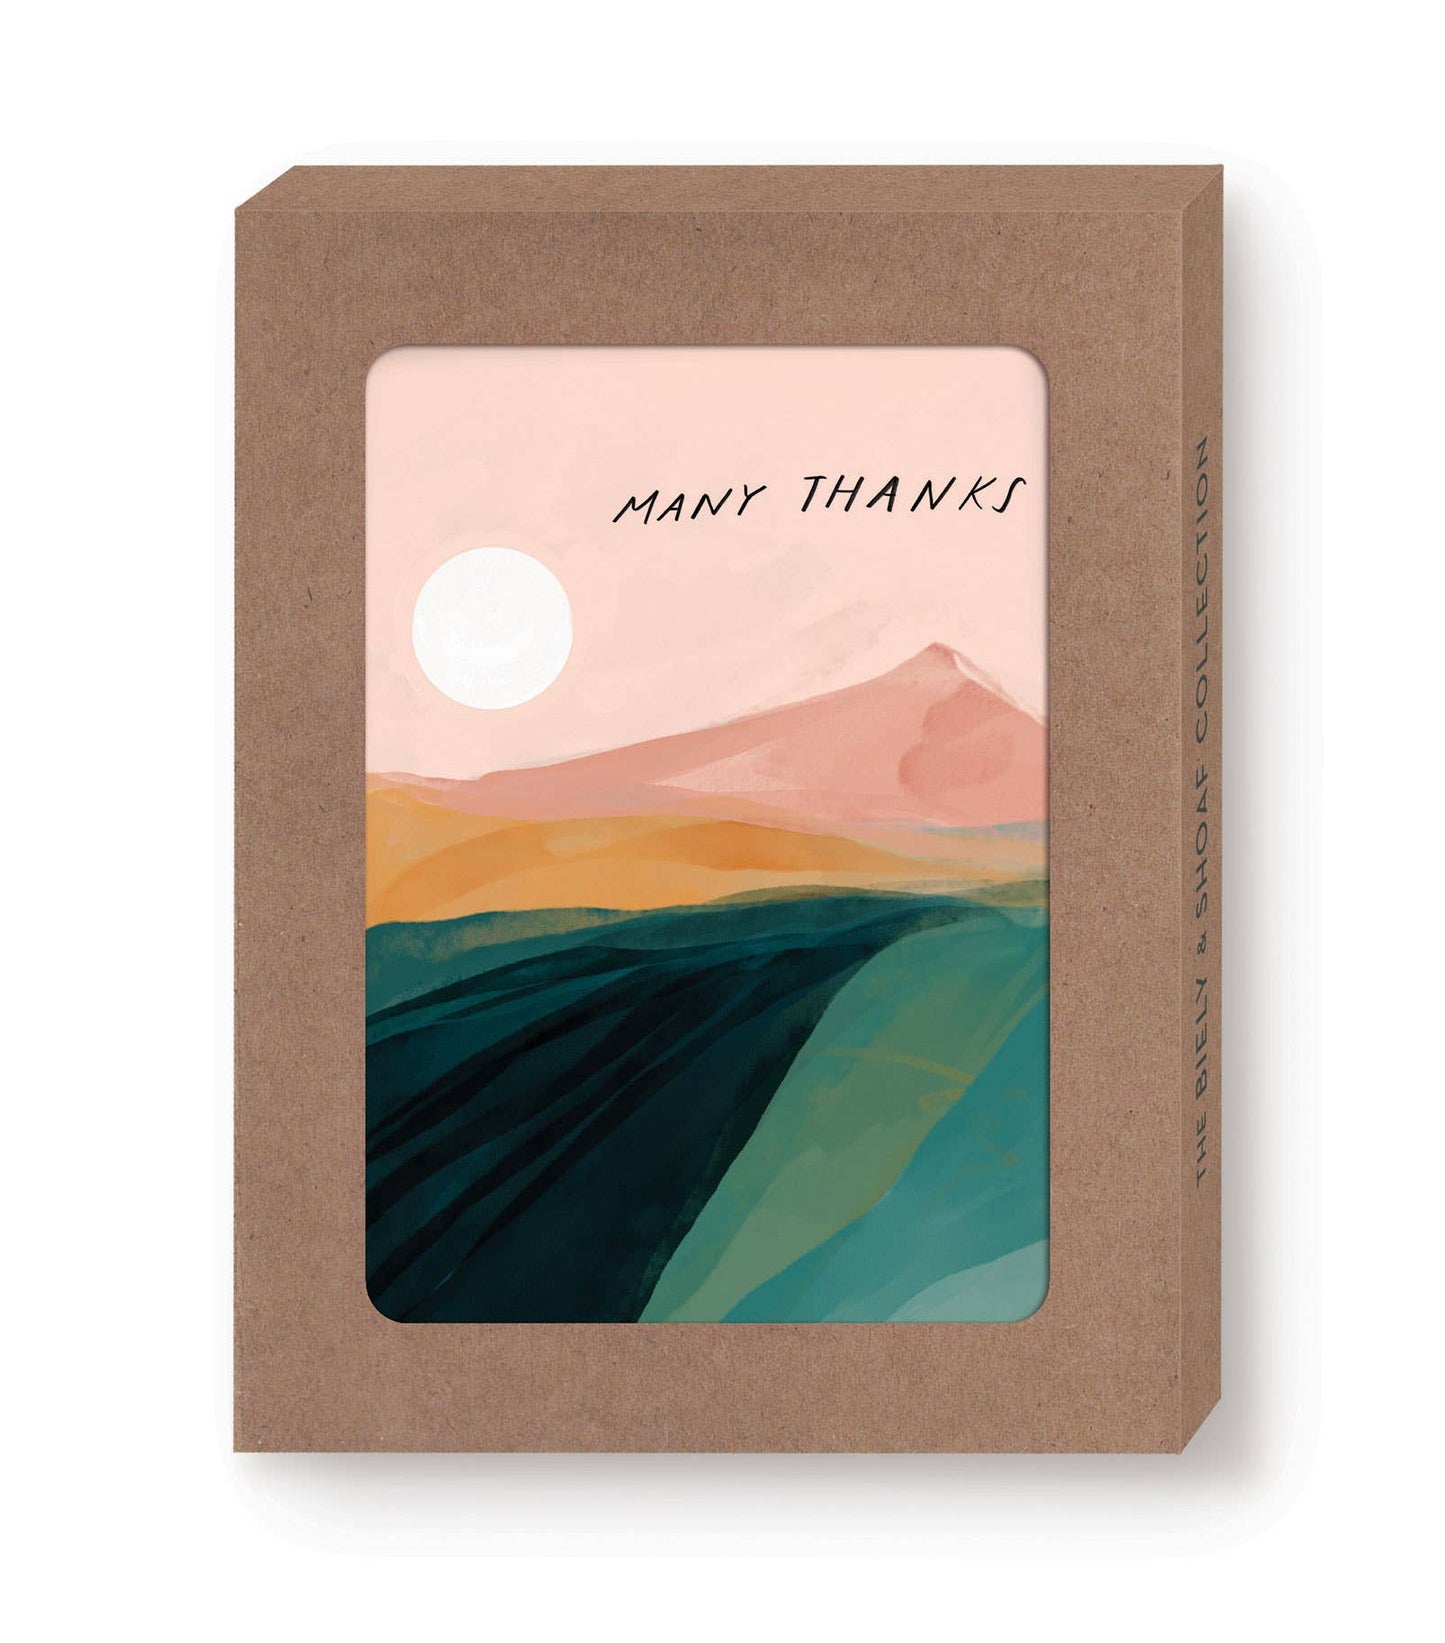 Many Thanks Boxed Cards - Set of 10